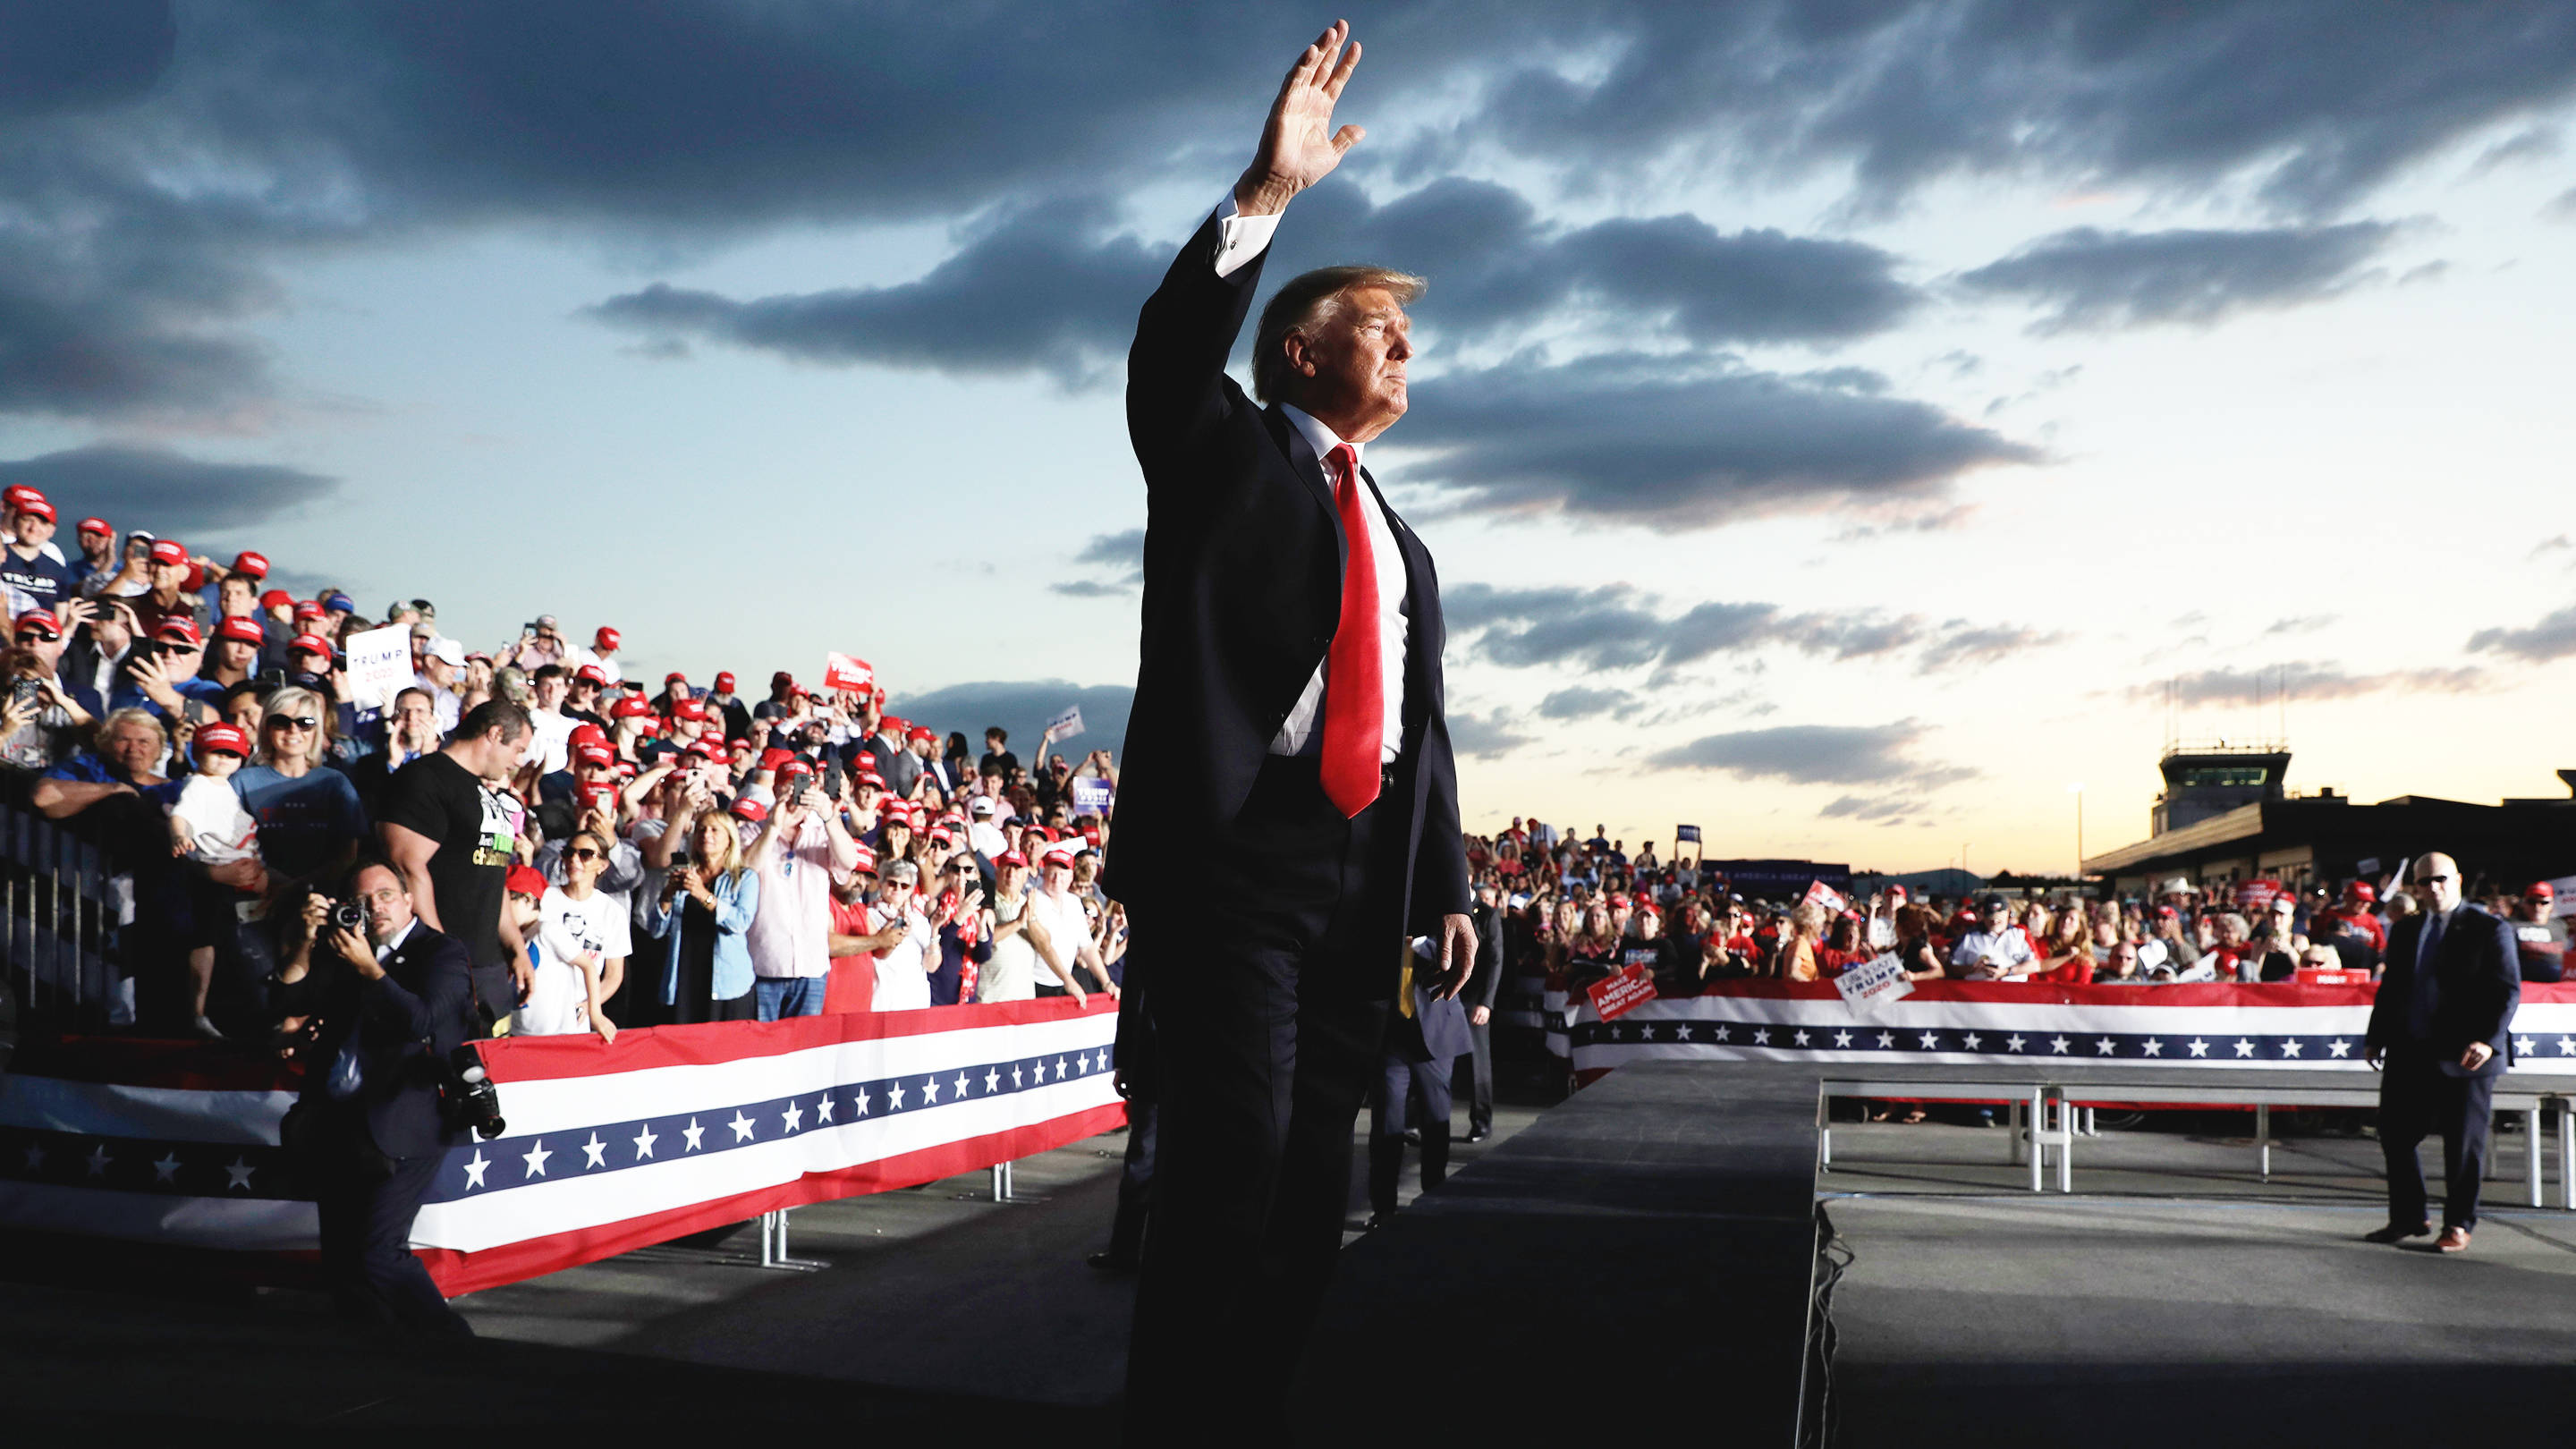 Donald Trump at a May 21, 2019 rally in Montoursville, Pennsylvania.